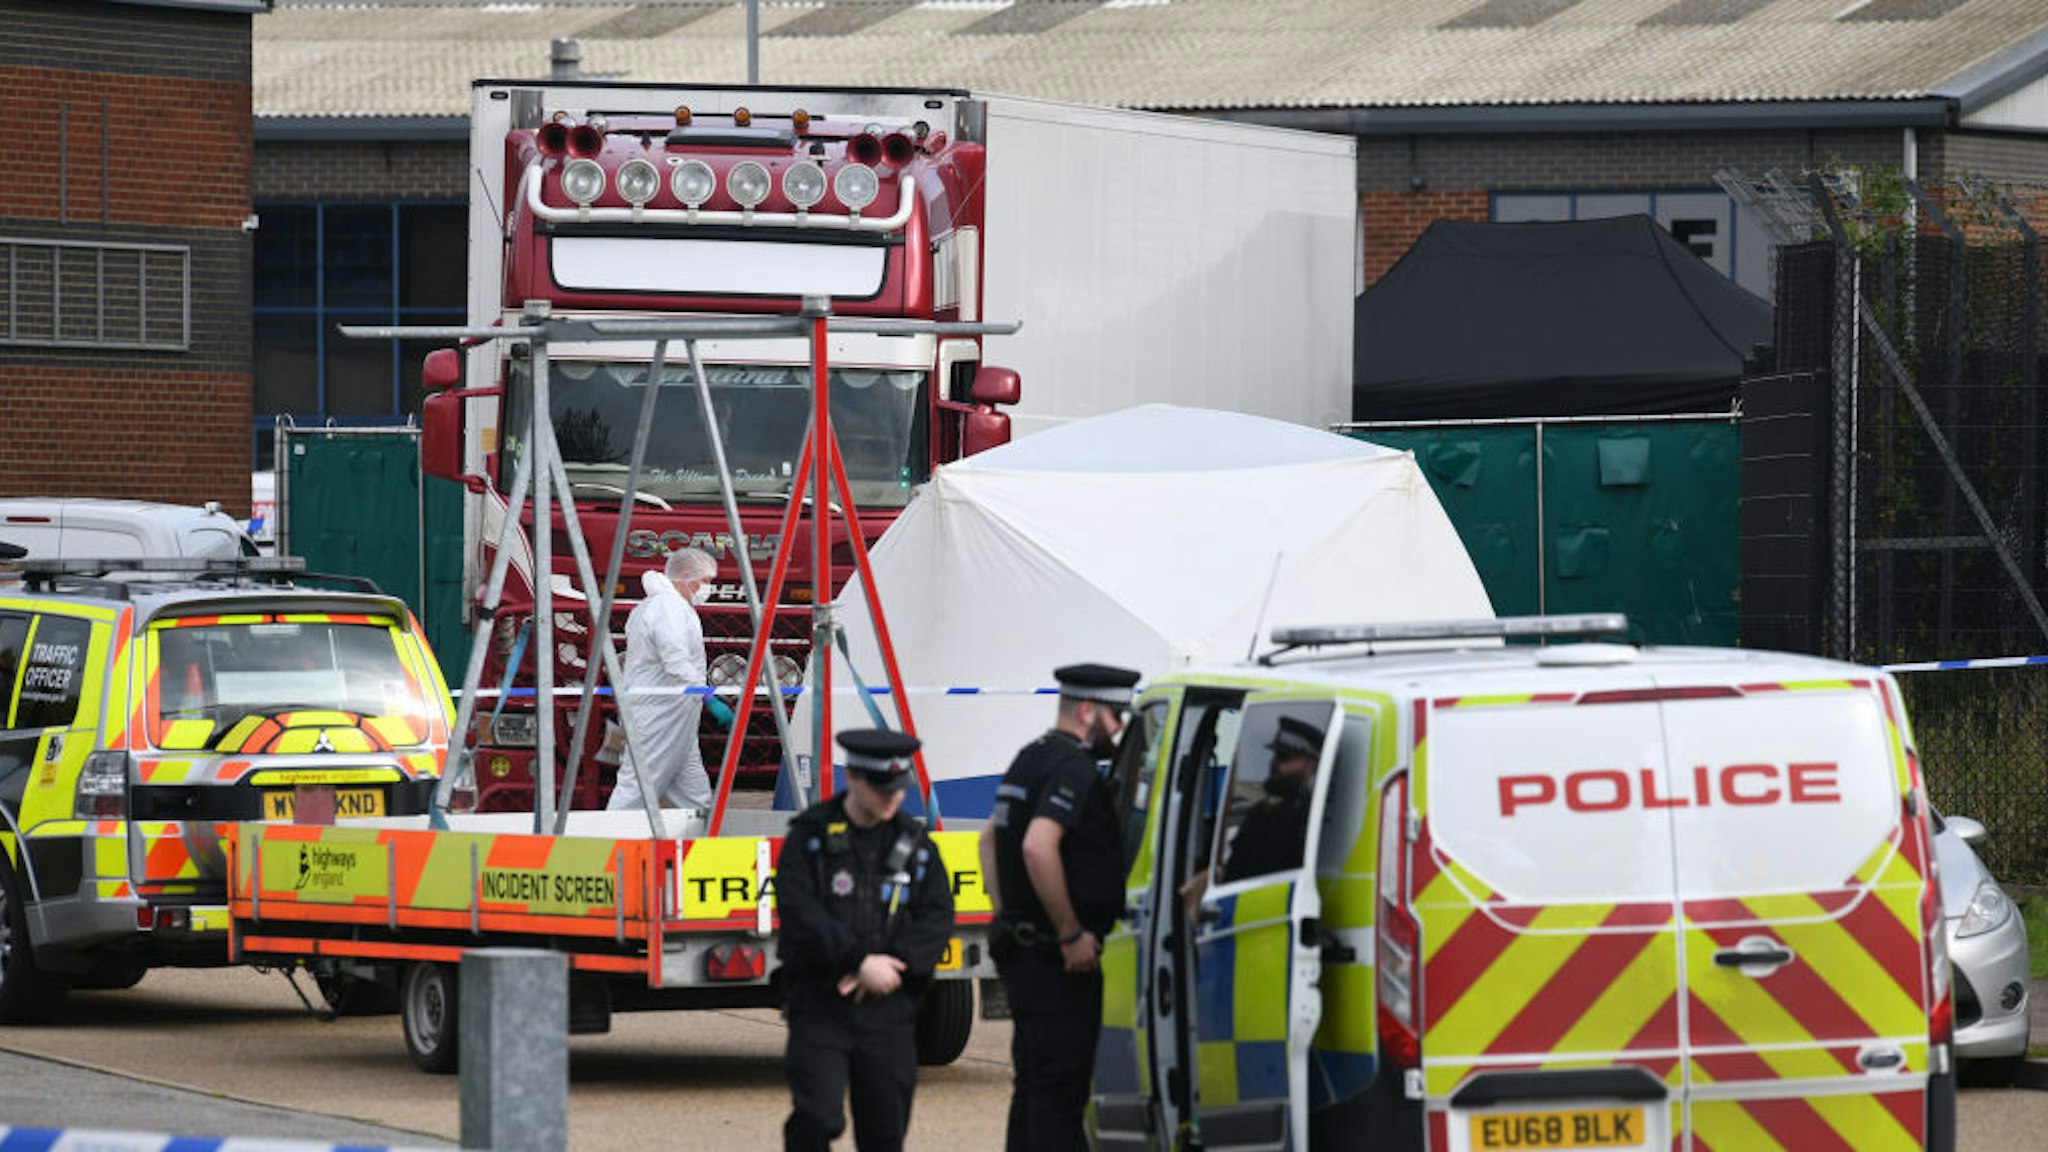 Police and forensic officers inspect the site where 39 bodies were discovered in the back of a lorry on October 23, 2019 in Thurrock, England. The lorry was discovered early Wednesday morning in Waterglade Industrial Park on Eastern Avenue in the town of Grays. Authorities said they believed the lorry originated in Bulgaria and entered the country at Holyhead on October 19. The suspected driver was arrested in connection with the investigation. (Photo by Leon Neal/Getty Images)